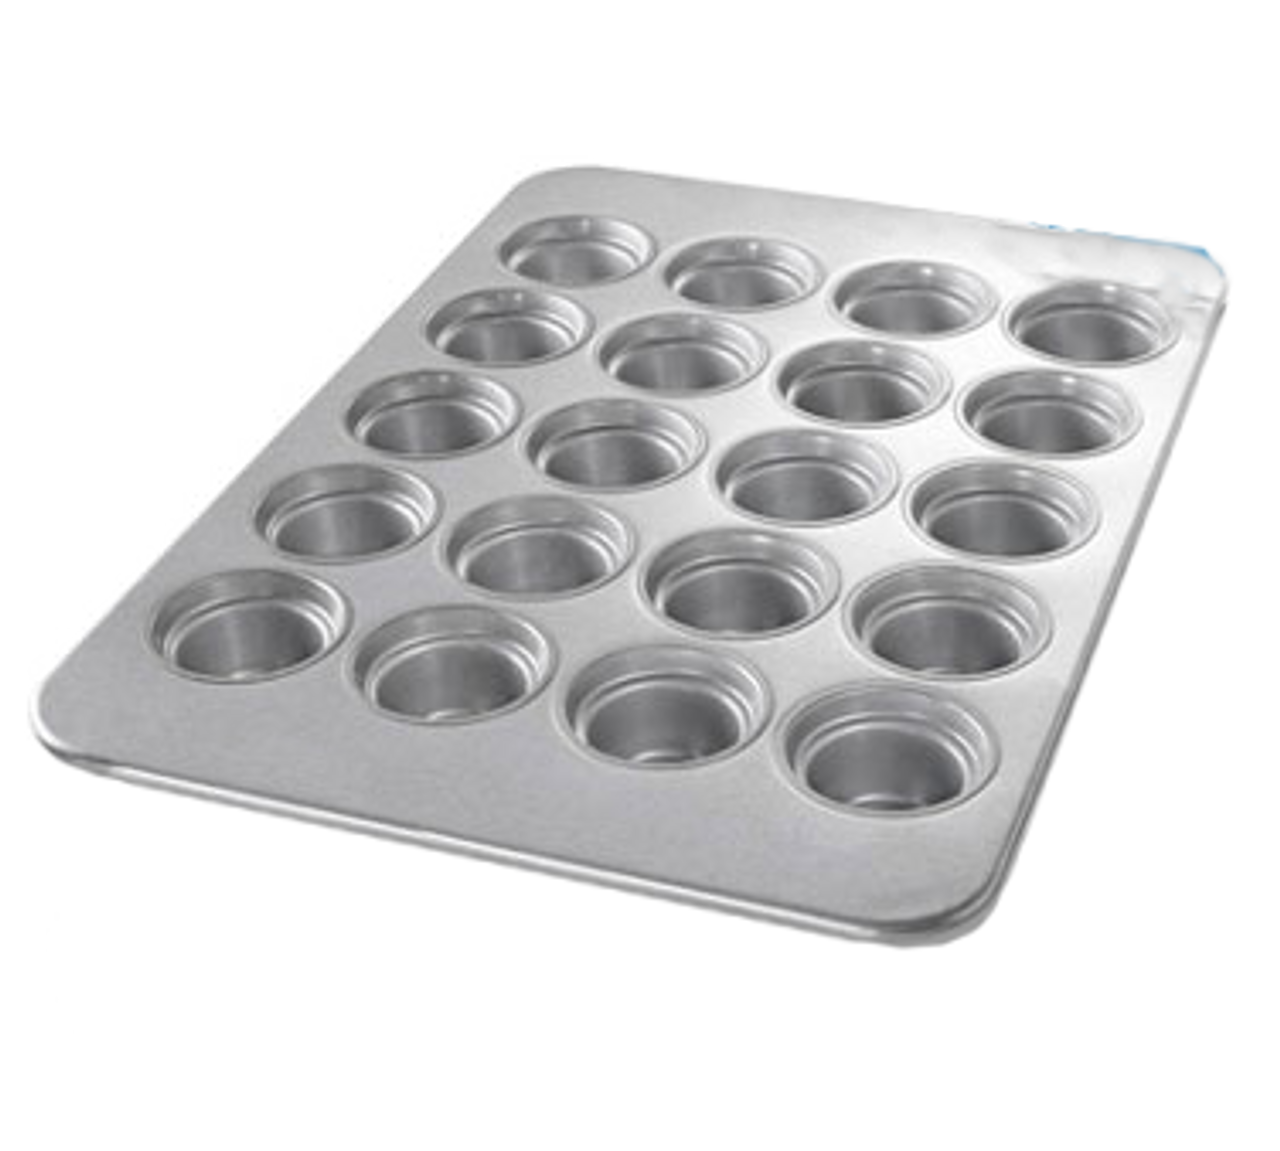 Chicago Metallic 44555 7.3 oz. Large Crown Muffin Pan - Ford Hotel Supply